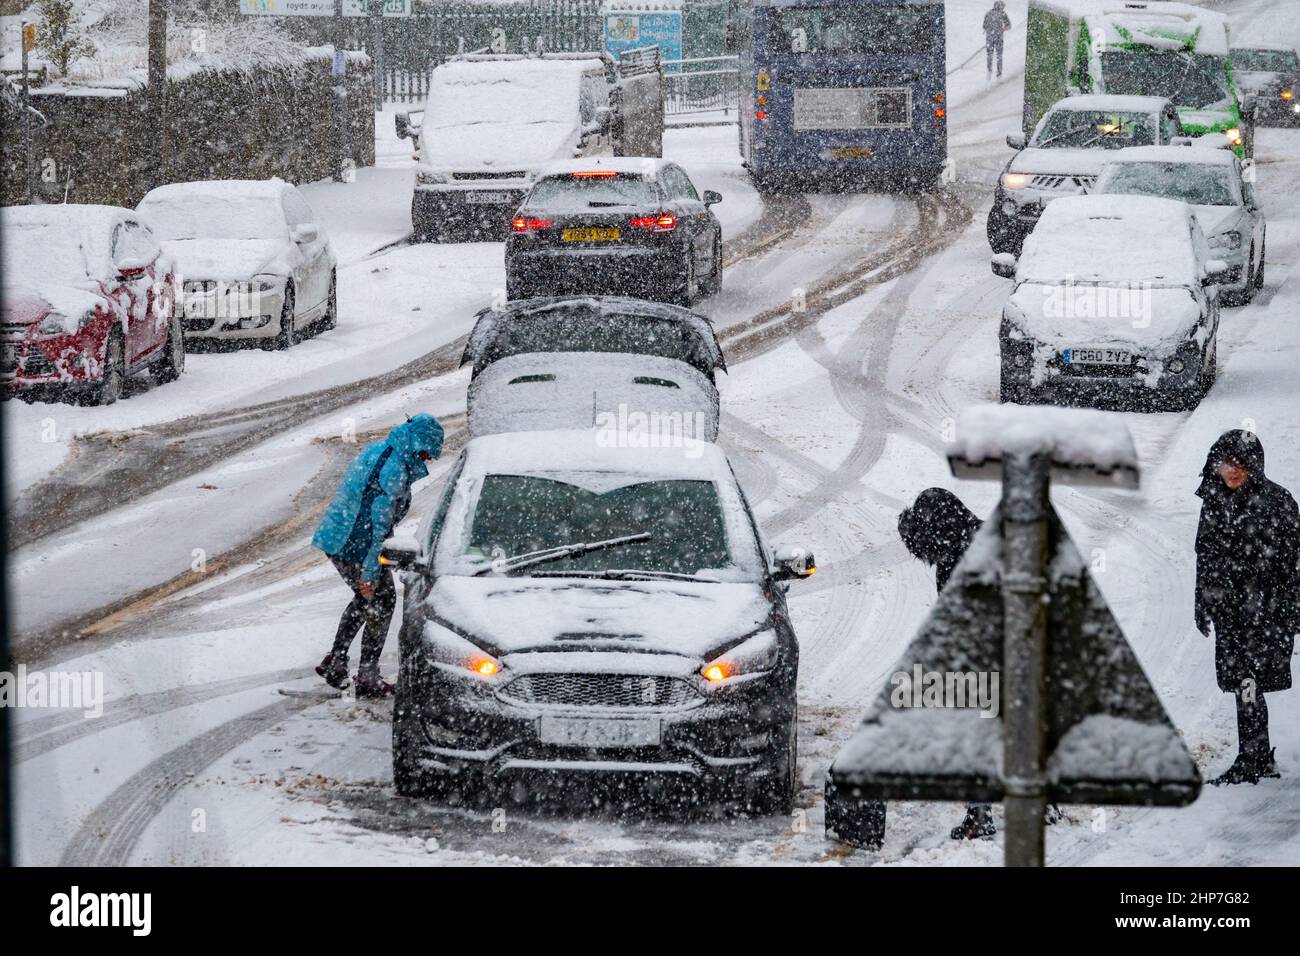 Snow and ice causing disruption on the hills around Bradford, West Yorkshire, UK. 19th Feb 2022. Cars struggle to move on slippery winter surfaces. Women try to clear wheels on snowy hill to get their car moving. Stock Photo